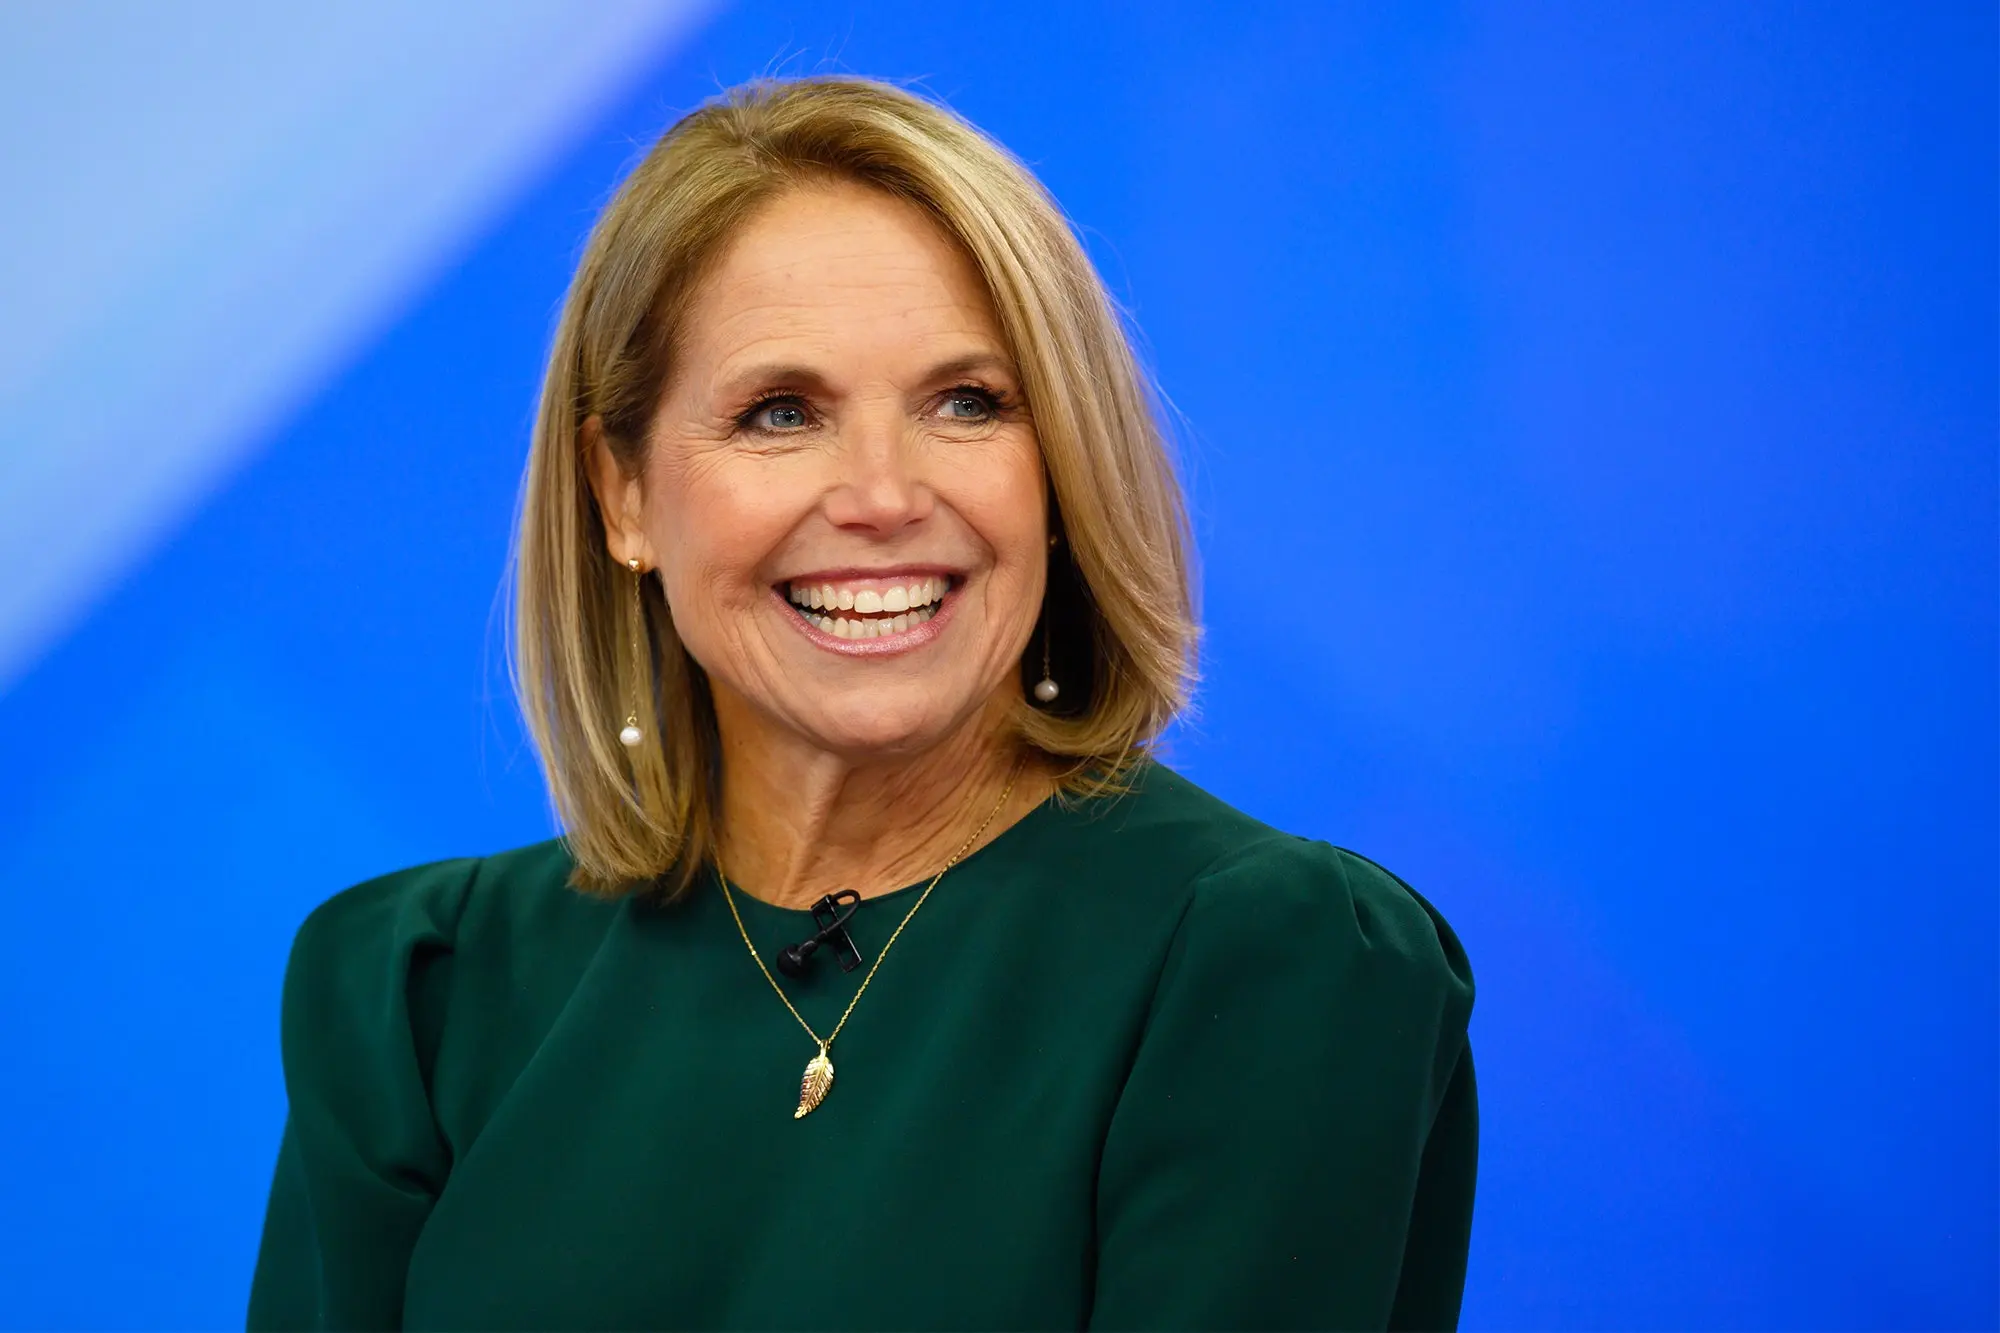 Former NBC Anchor Katie Couric talks about breast cancer, calls herself 'lucky'. Find out why